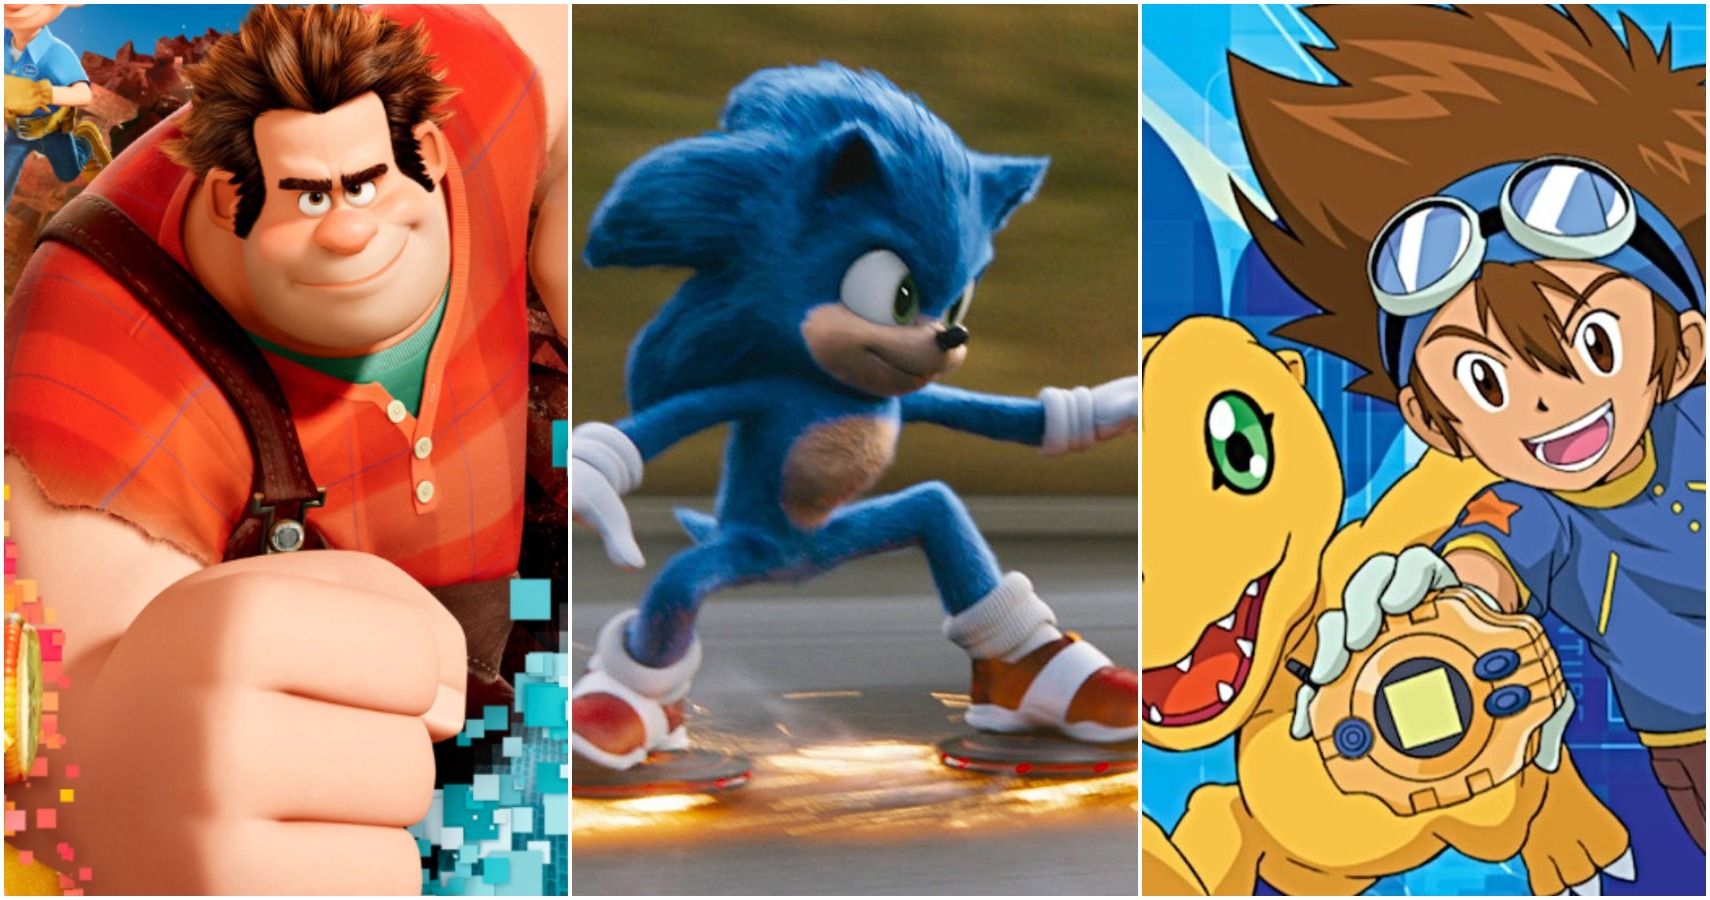 10 Movies & TV Shows To Watch If You Like Sonic The Hedgehog